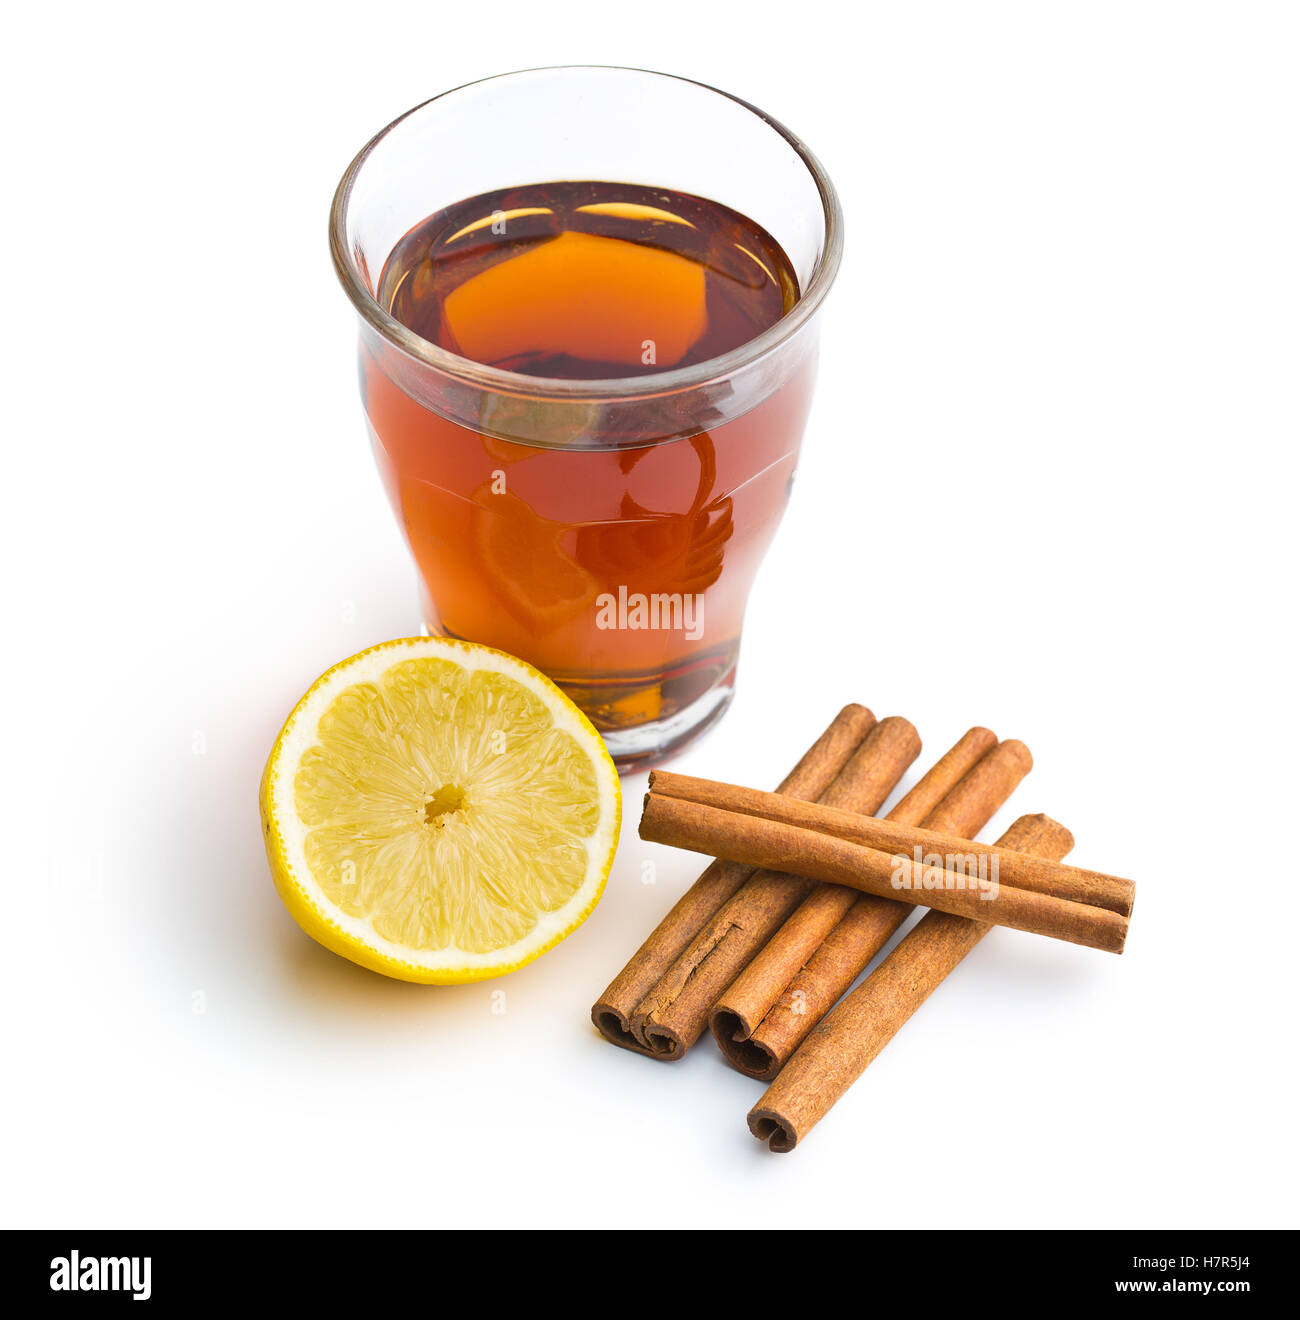 Tea in glass cup, lemon and cinnamon sticks isolated on white background. Stock Photo